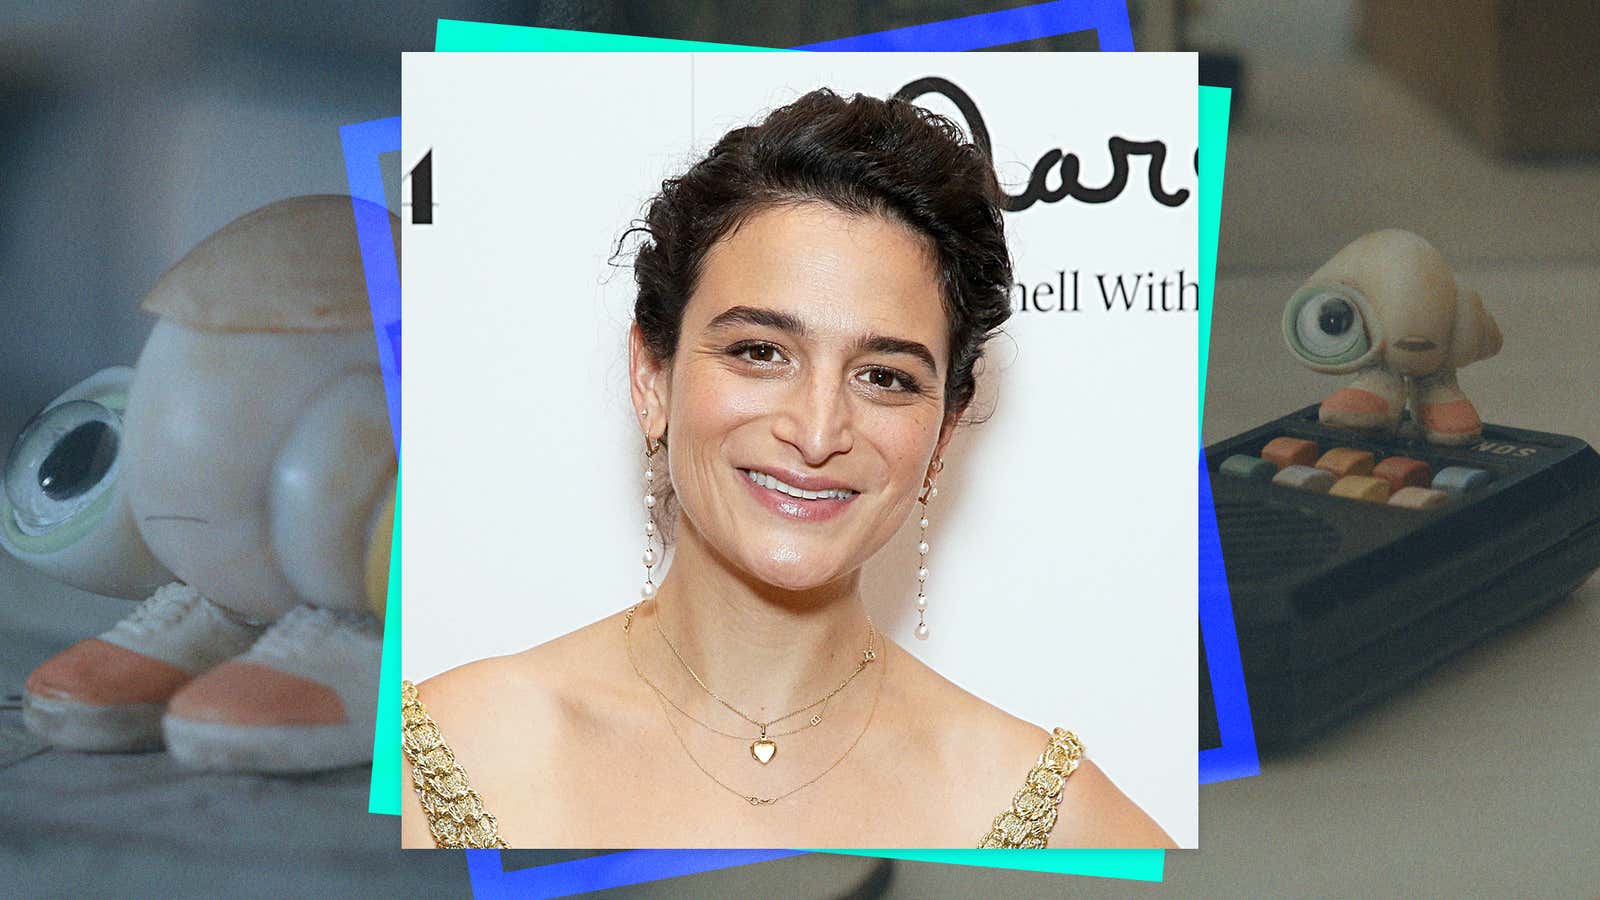 (From left to right): Marcel The Shell With Shoes On (Courtesy of A24), Jenny Slate (Dominik Bindl/Getty Images), Marcel The Shell With Shoes On (Courtesy of A24)